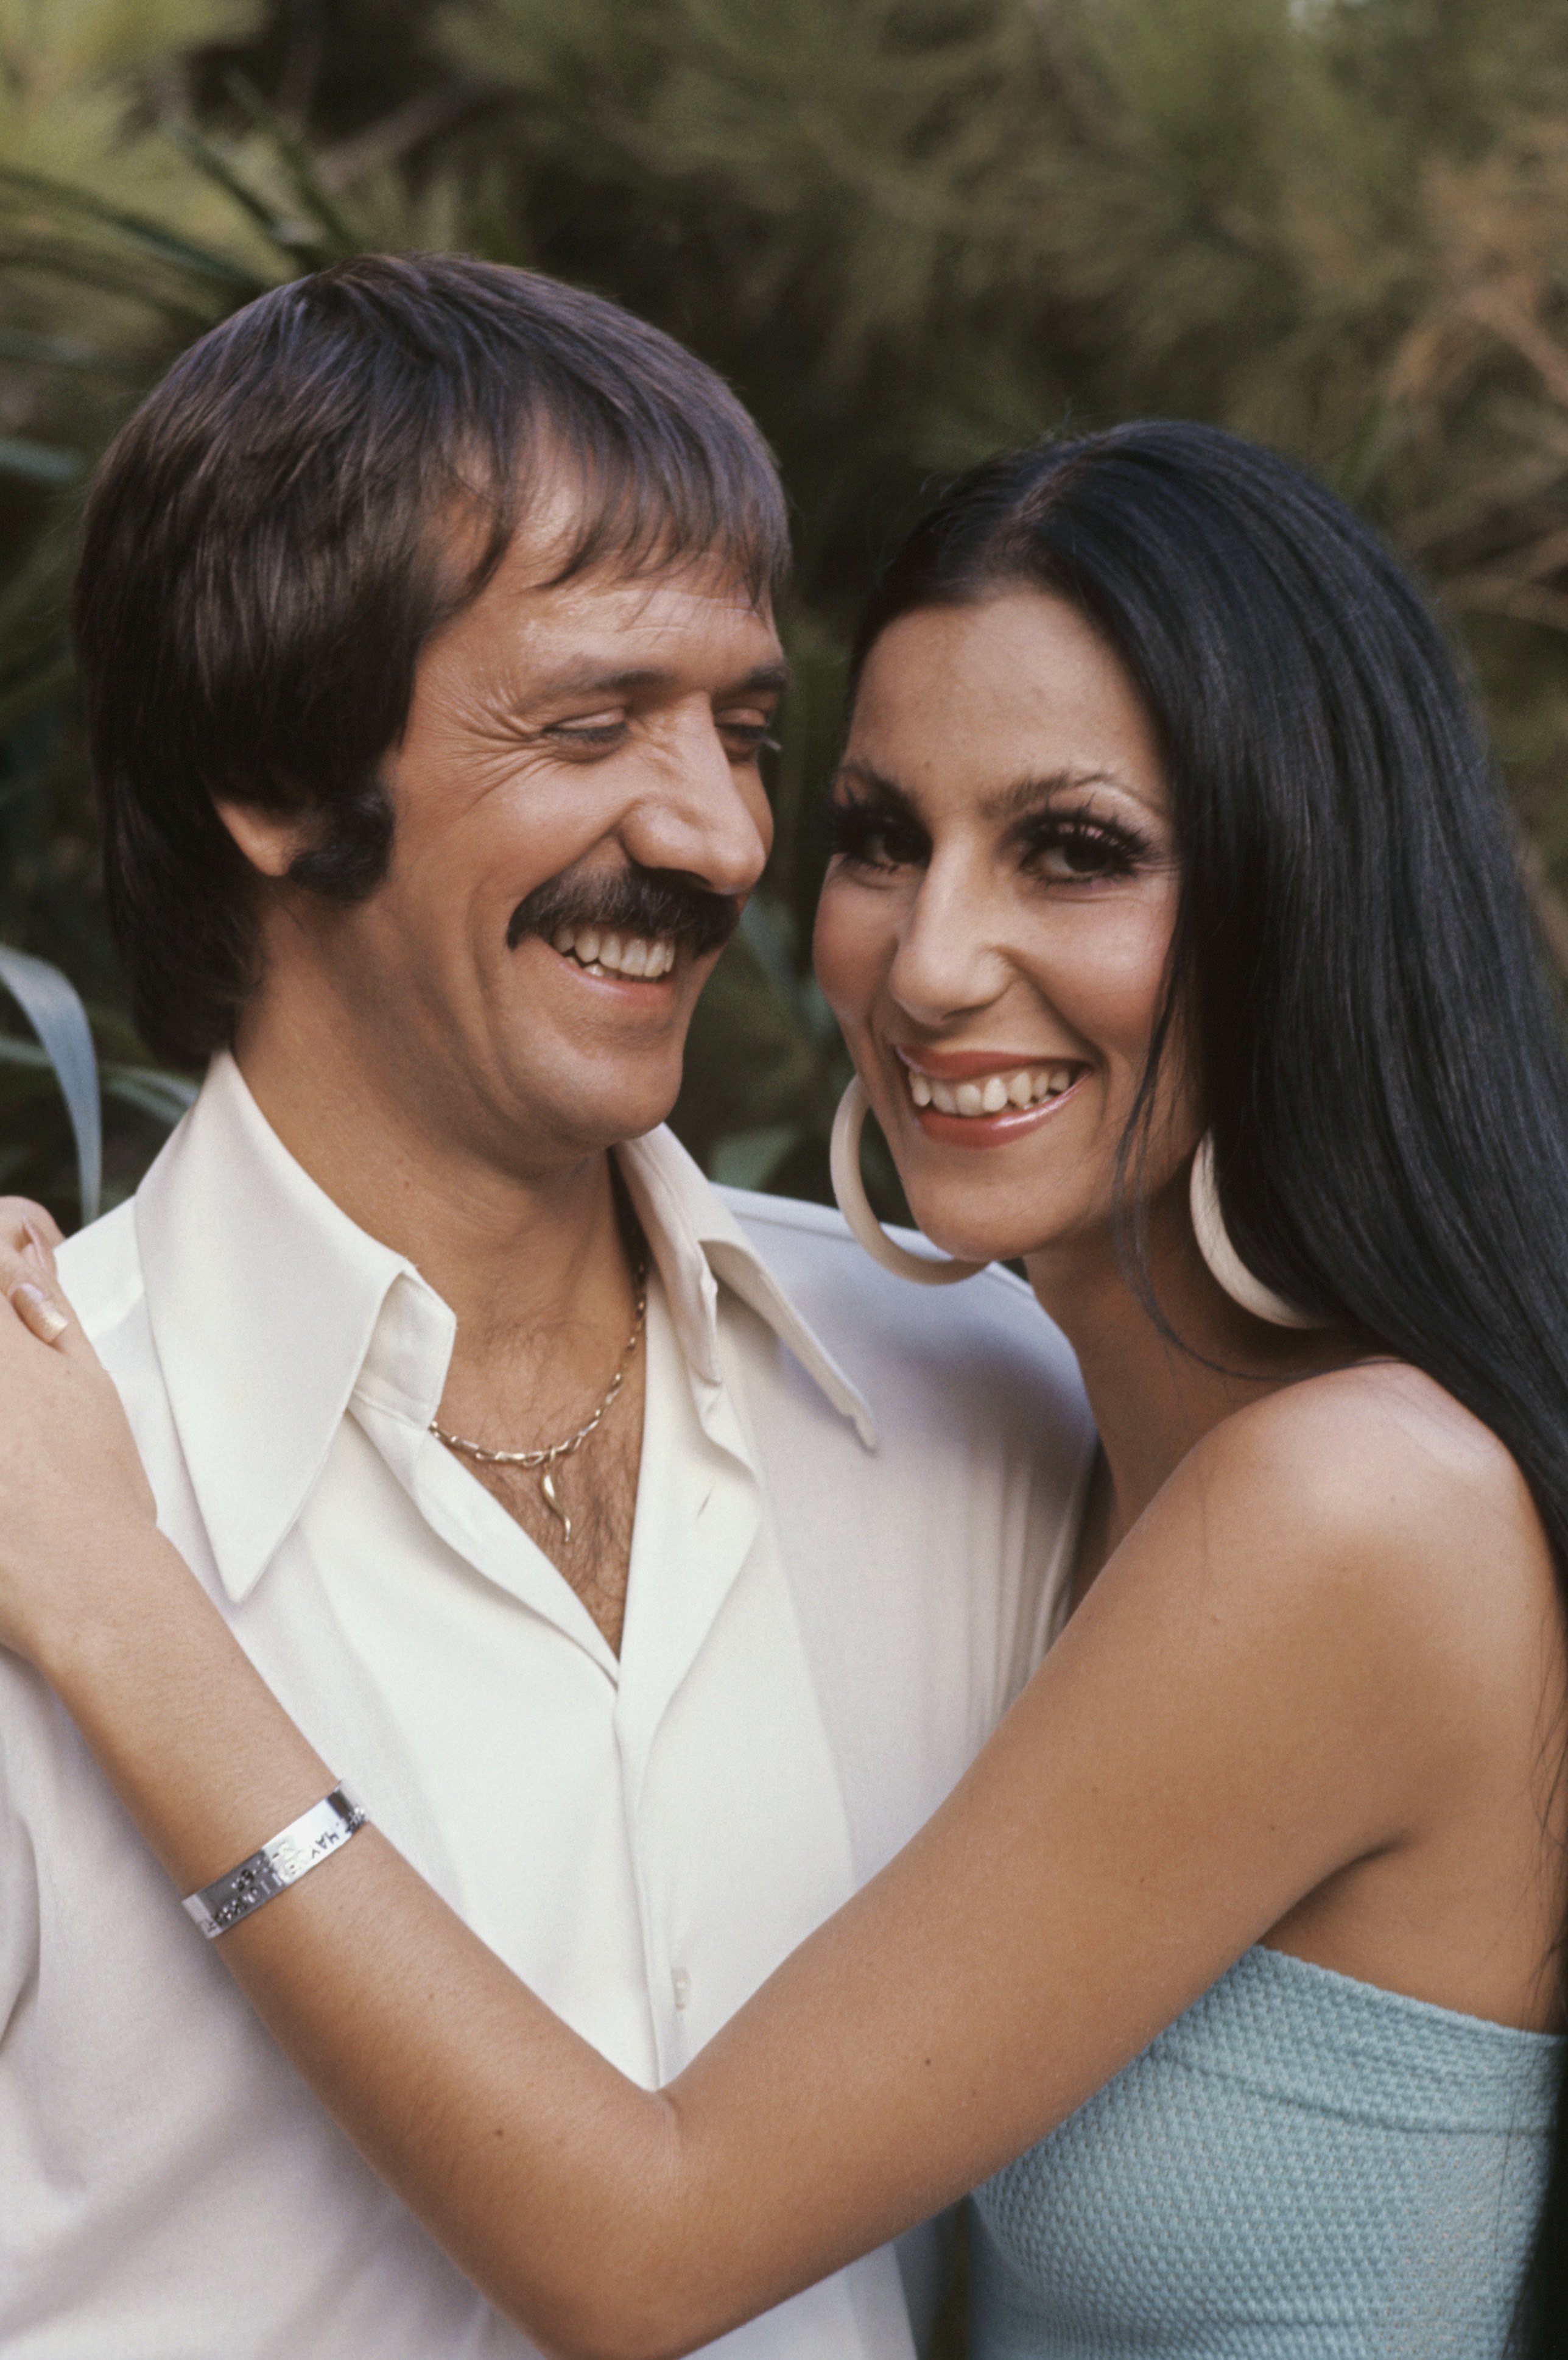 Singers and TV stars Sonny and Cher pose for a portrait at home in Beverly Hills, California circa 1970 | Source: Getty Images